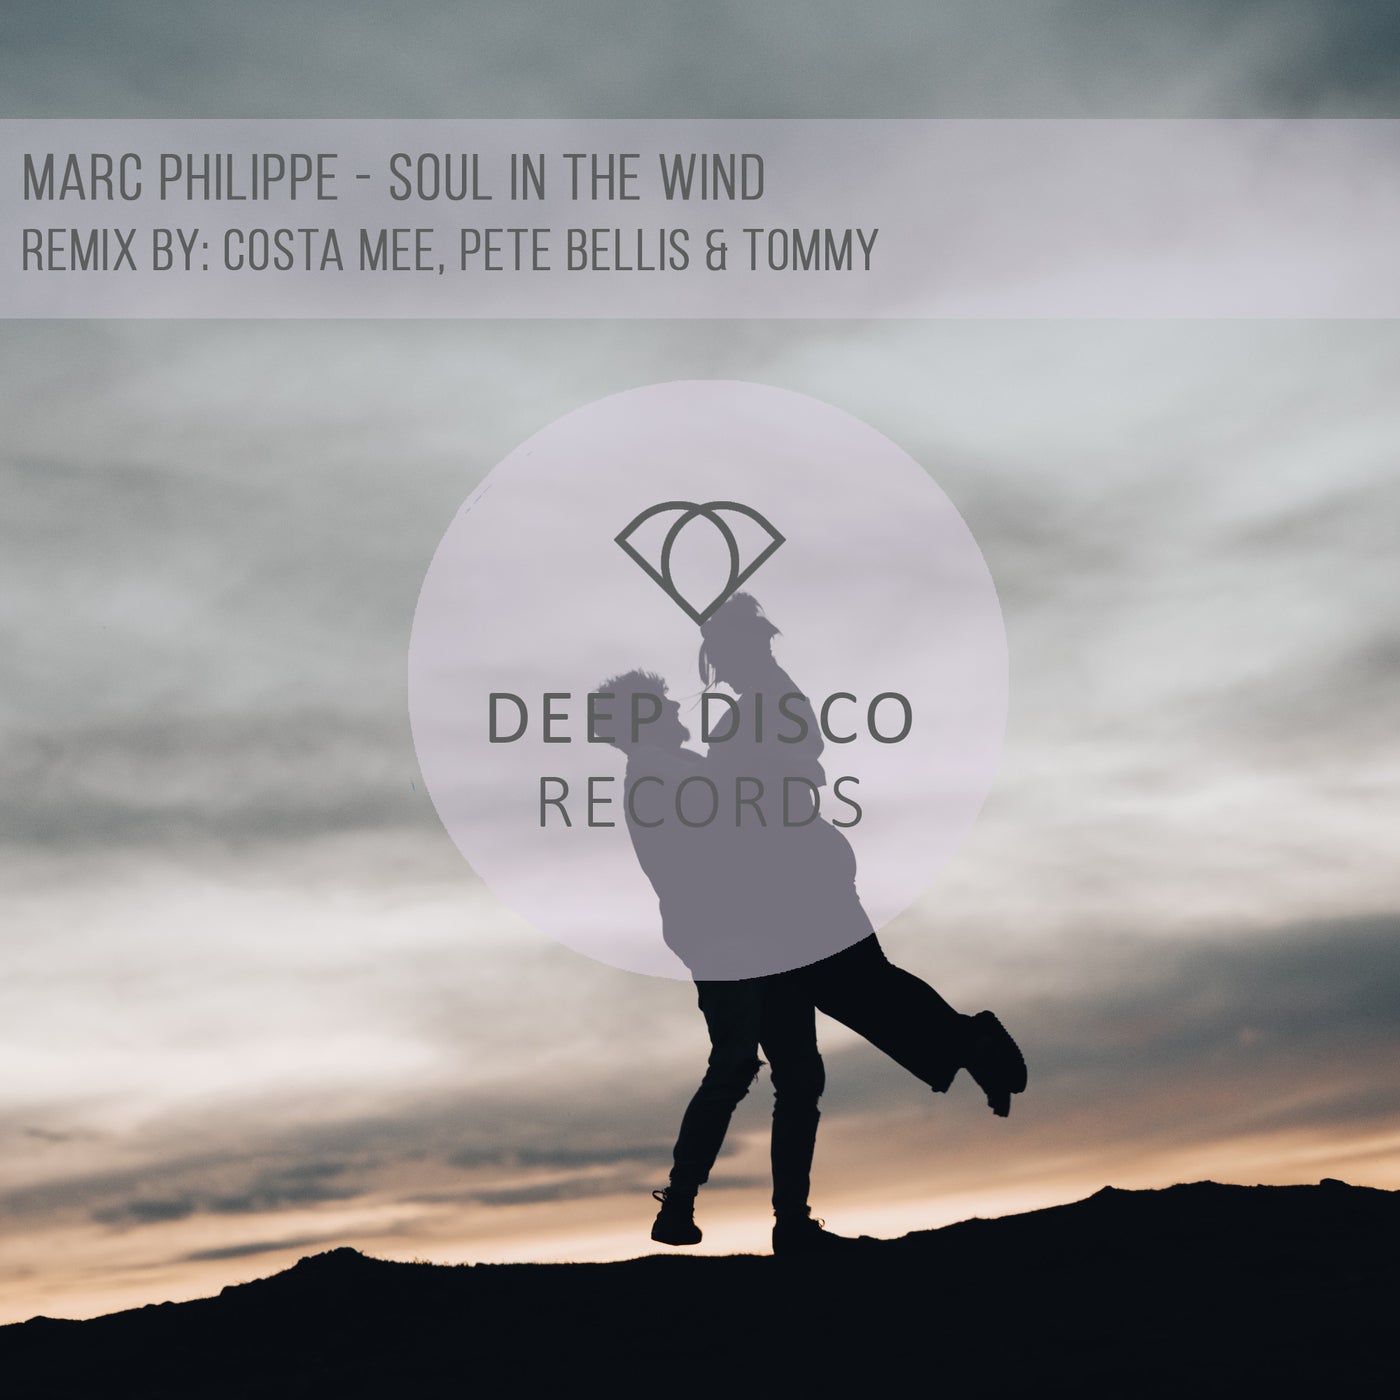 Costa mee mix. Marc Philippe - Soul in the Wind. Costa mee & Pete Bellis & Tommy. Marc Philippe - Dancer in the Dark. Costa mee 2021.